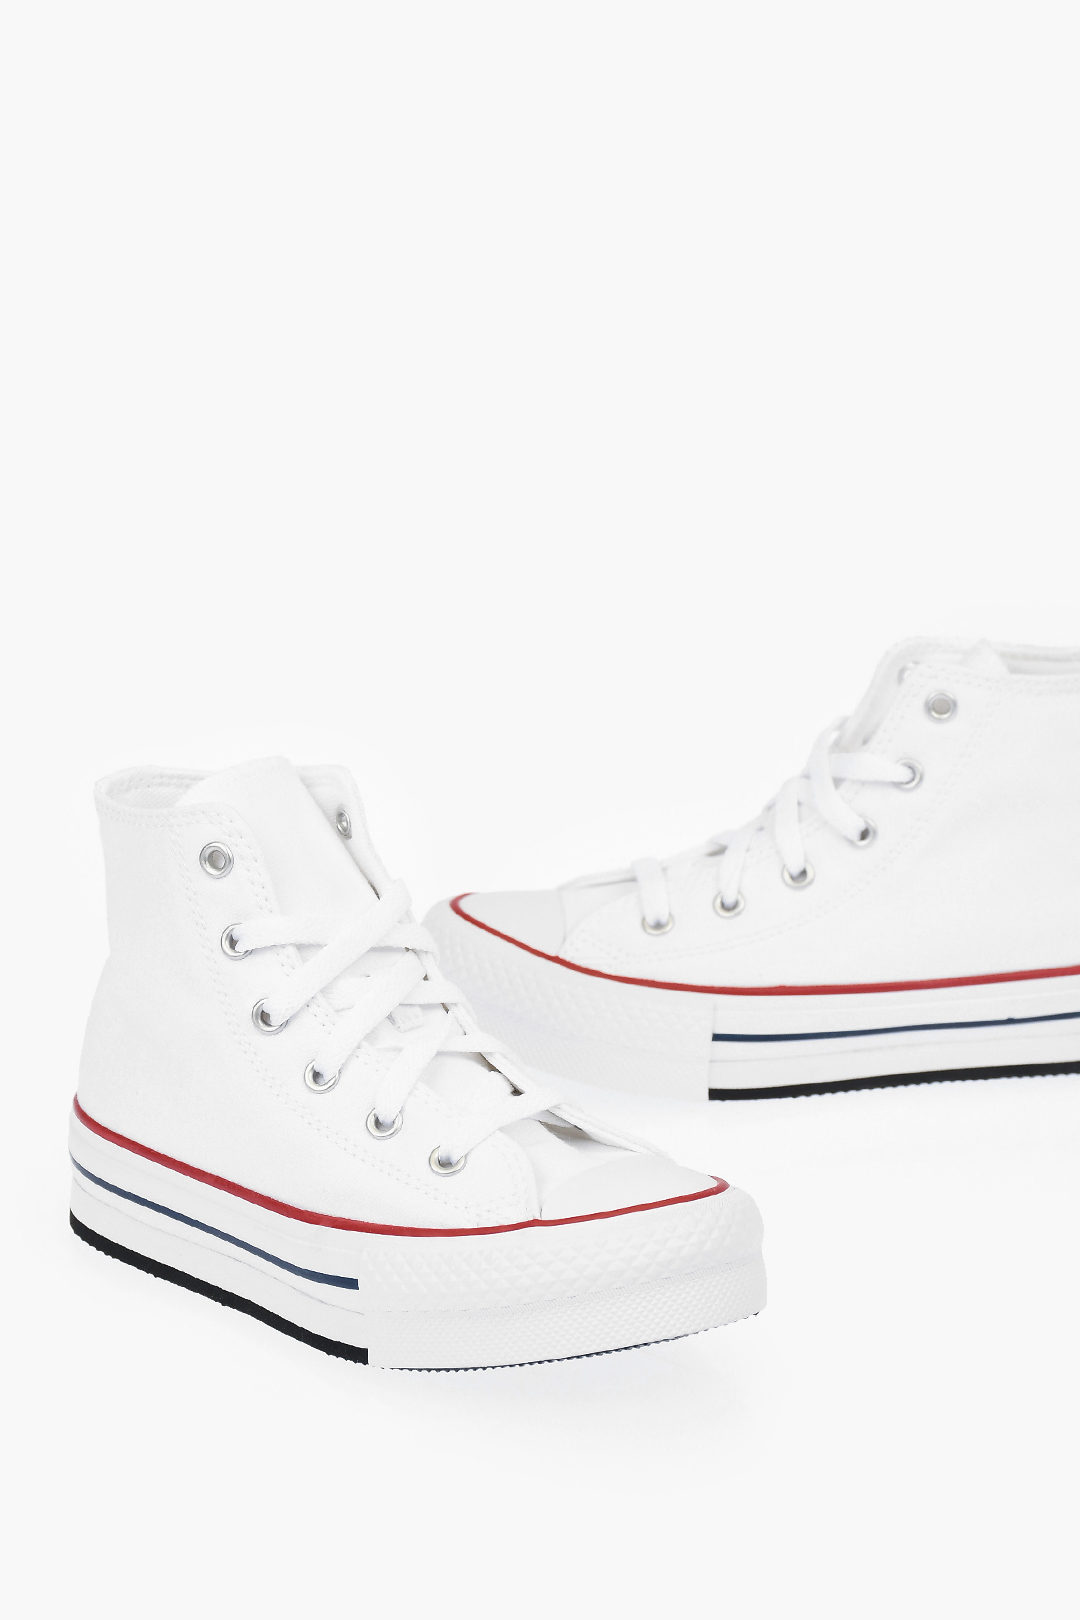 Duplicaat Bediende rouw Converse KIDS ALL STAR Fabric EVA LIFT Sneakers unisex children boys girls  - Glamood Outlet